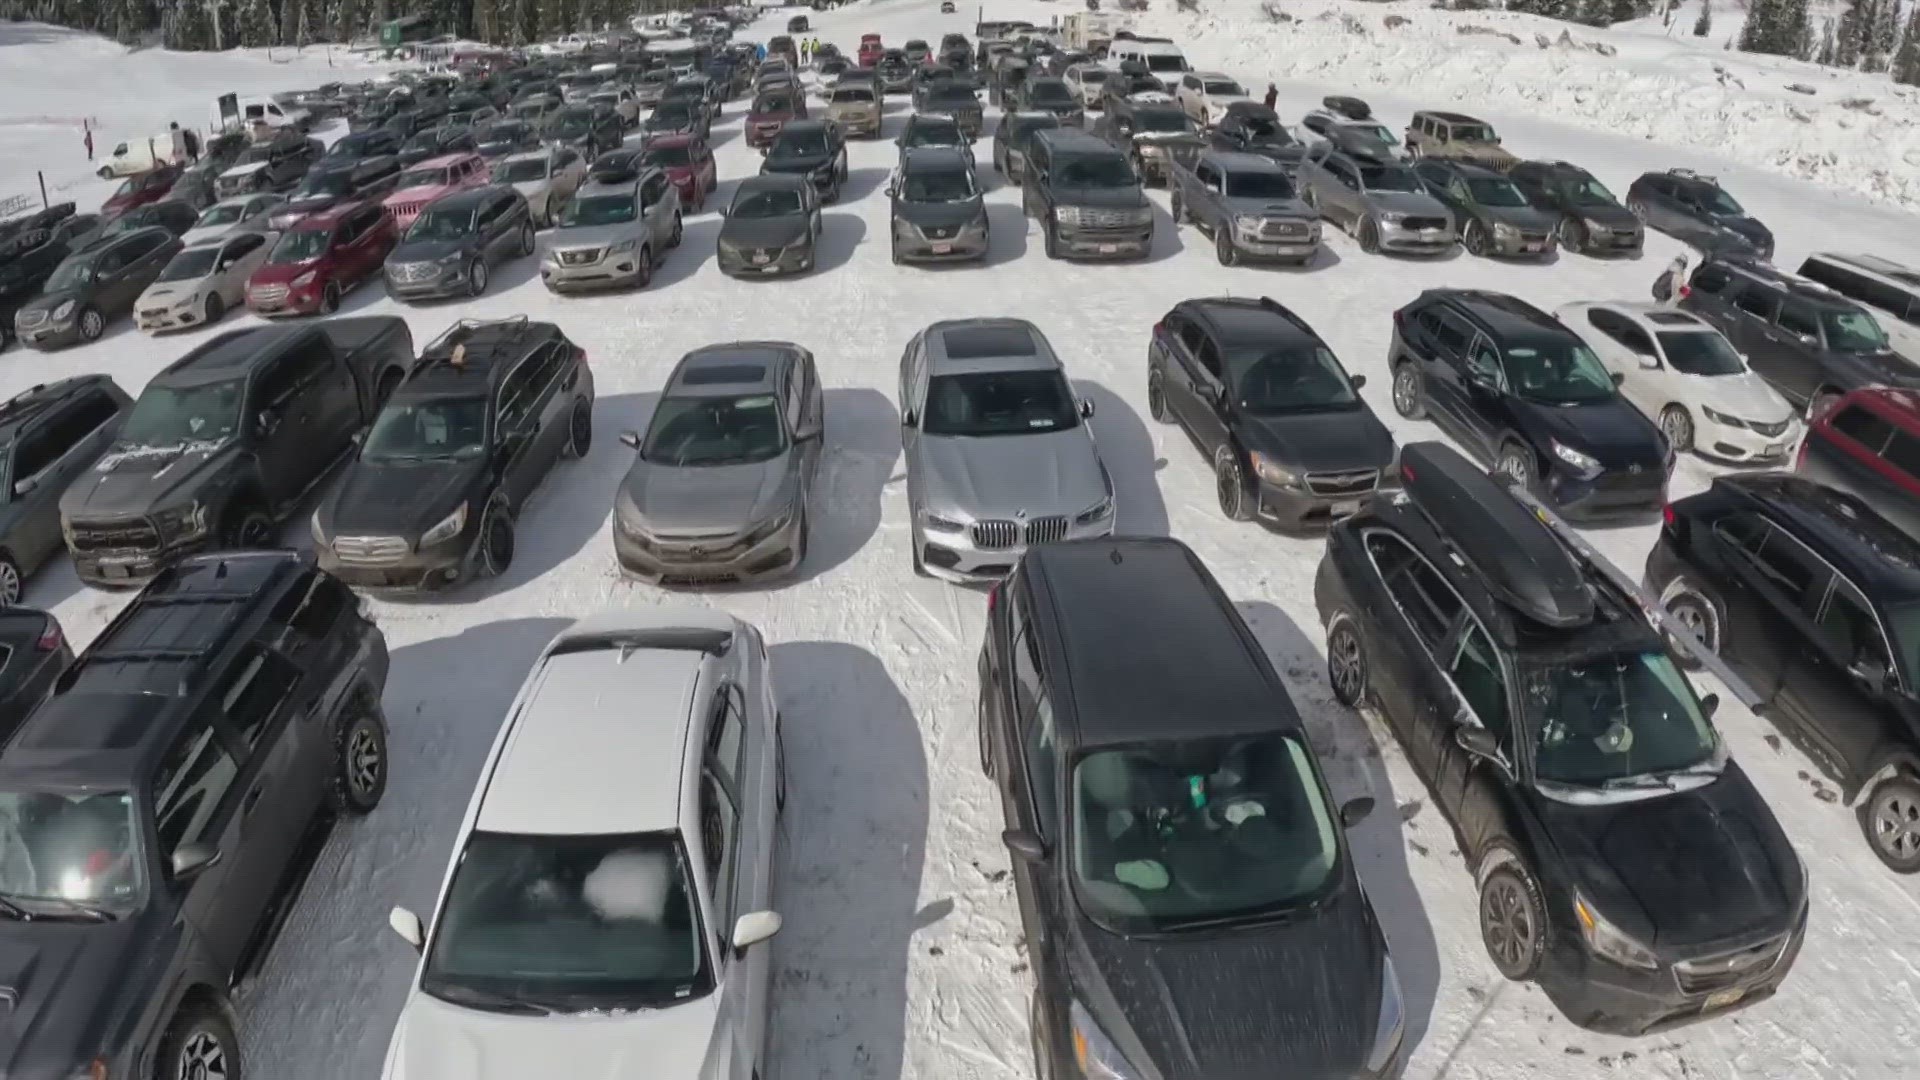 Arapahoe Basin is now charging to park in their most popular and closest parking lot on weekends unless you're carpooling with at least one other person.